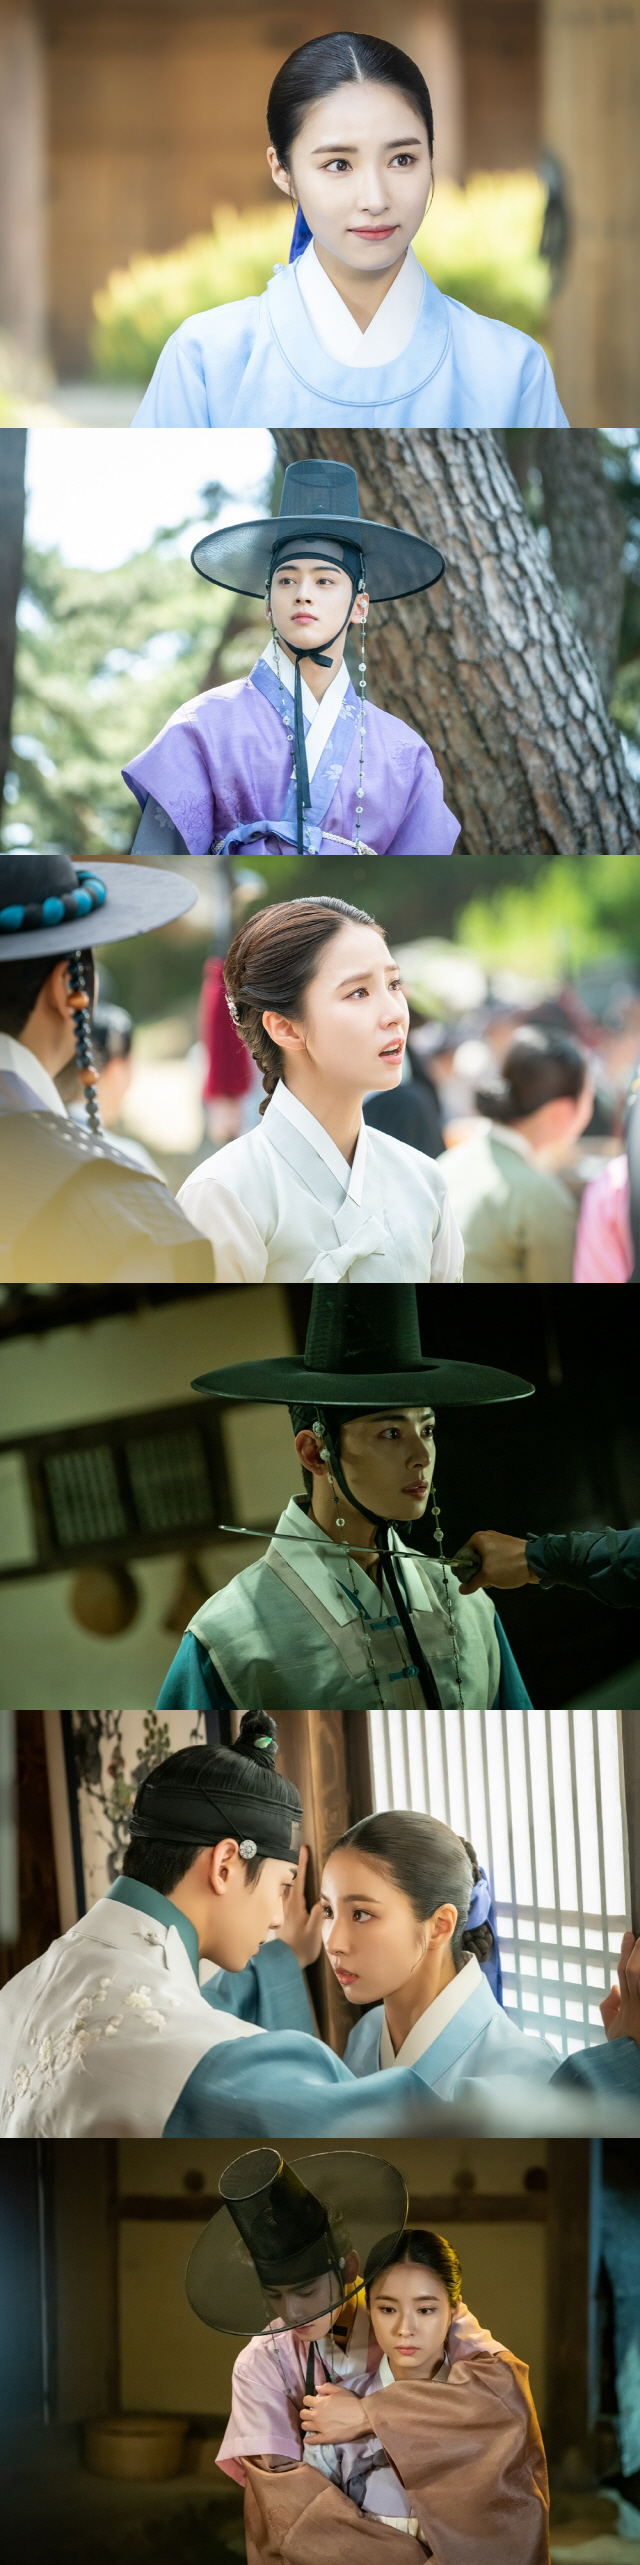 MBC Wednesday-Thursday Evening drama New Entrepreneur Rookie Historian Goo Hae-ryung (playwright Kim Ho-soo, director Kang Il-soo, and Han Hyun-hee I-produced Green Snake Media), which has been the number one audience since its first broadcast, has maintained its number one spot for six consecutive weeks in the water dramas topical index as well as its ratings. The three dramas continued their journey.MBC Wednesday-Thursday evening drama Rookie Historian Goo Hae-ryung, which has been ranked number one in the audience rating of the unconventional tree drama since its first broadcast, is a fiction drama that plants precious seeds of change against the old truth that men and women are unique in the background of the 19th century Joseon, This is the first problematic Ada Lovelace (Rookie Historian Goo Hae-ryung (Shin Se-kyung) of Joseon and the full romance of Phil by Prince Lee Rim (Cha Eun-woo).Shin Se-kyung, the historical drama goddess, and Actor Cha Eun-woo, the next generation, and Park Ki-woong, who have been shining their presence through various works, have appeared in the house theater.In particular, Shin Se-kyungs performance, which shows perfect synchro rate with characters, is remarkable.Rookie Historian Goo Hae-ryung, a yangban house master, is the first Ada Lovelace in Korea through marriage and a star poem, and is an active figure in love as well as walking the degree of military officer in the court where power and darkness are dizzying.Shin Se-kyung is not living in response to universal values, but is supported by viewers by drawing Rookie Historian Goo Hae-ryung, who leads life independently with his own choice and will.In addition, Cha Eun-woo of Irim Station of Dowon Daegun, who expressed himself only by writing love novels while being disconnected from the world, was well received for expressing the pure feeling of the early stage with a unique clear energy.Here, Rookie Historian Goo Hae-ryung meets the world and love and delicately depicts the growth of the prince and man, solidifying his position as an actor.Viewers also show support and support, saying, The Korean version of Girl Crush Na Hae-ryung is different from the existing historical drama Yeoju. I cried when I was in a hurry. I was aware of Lee Lim and changed my eyes.Meanwhile, the 33rd to 34th episode Rookie Historian Goo Hae-ryung, starring Shin Se-kyung, Cha Eun-woo and Park Ki-woong, will be broadcast at 8:55 pm on Wednesday, 18th due to the Chuseok holiday break.